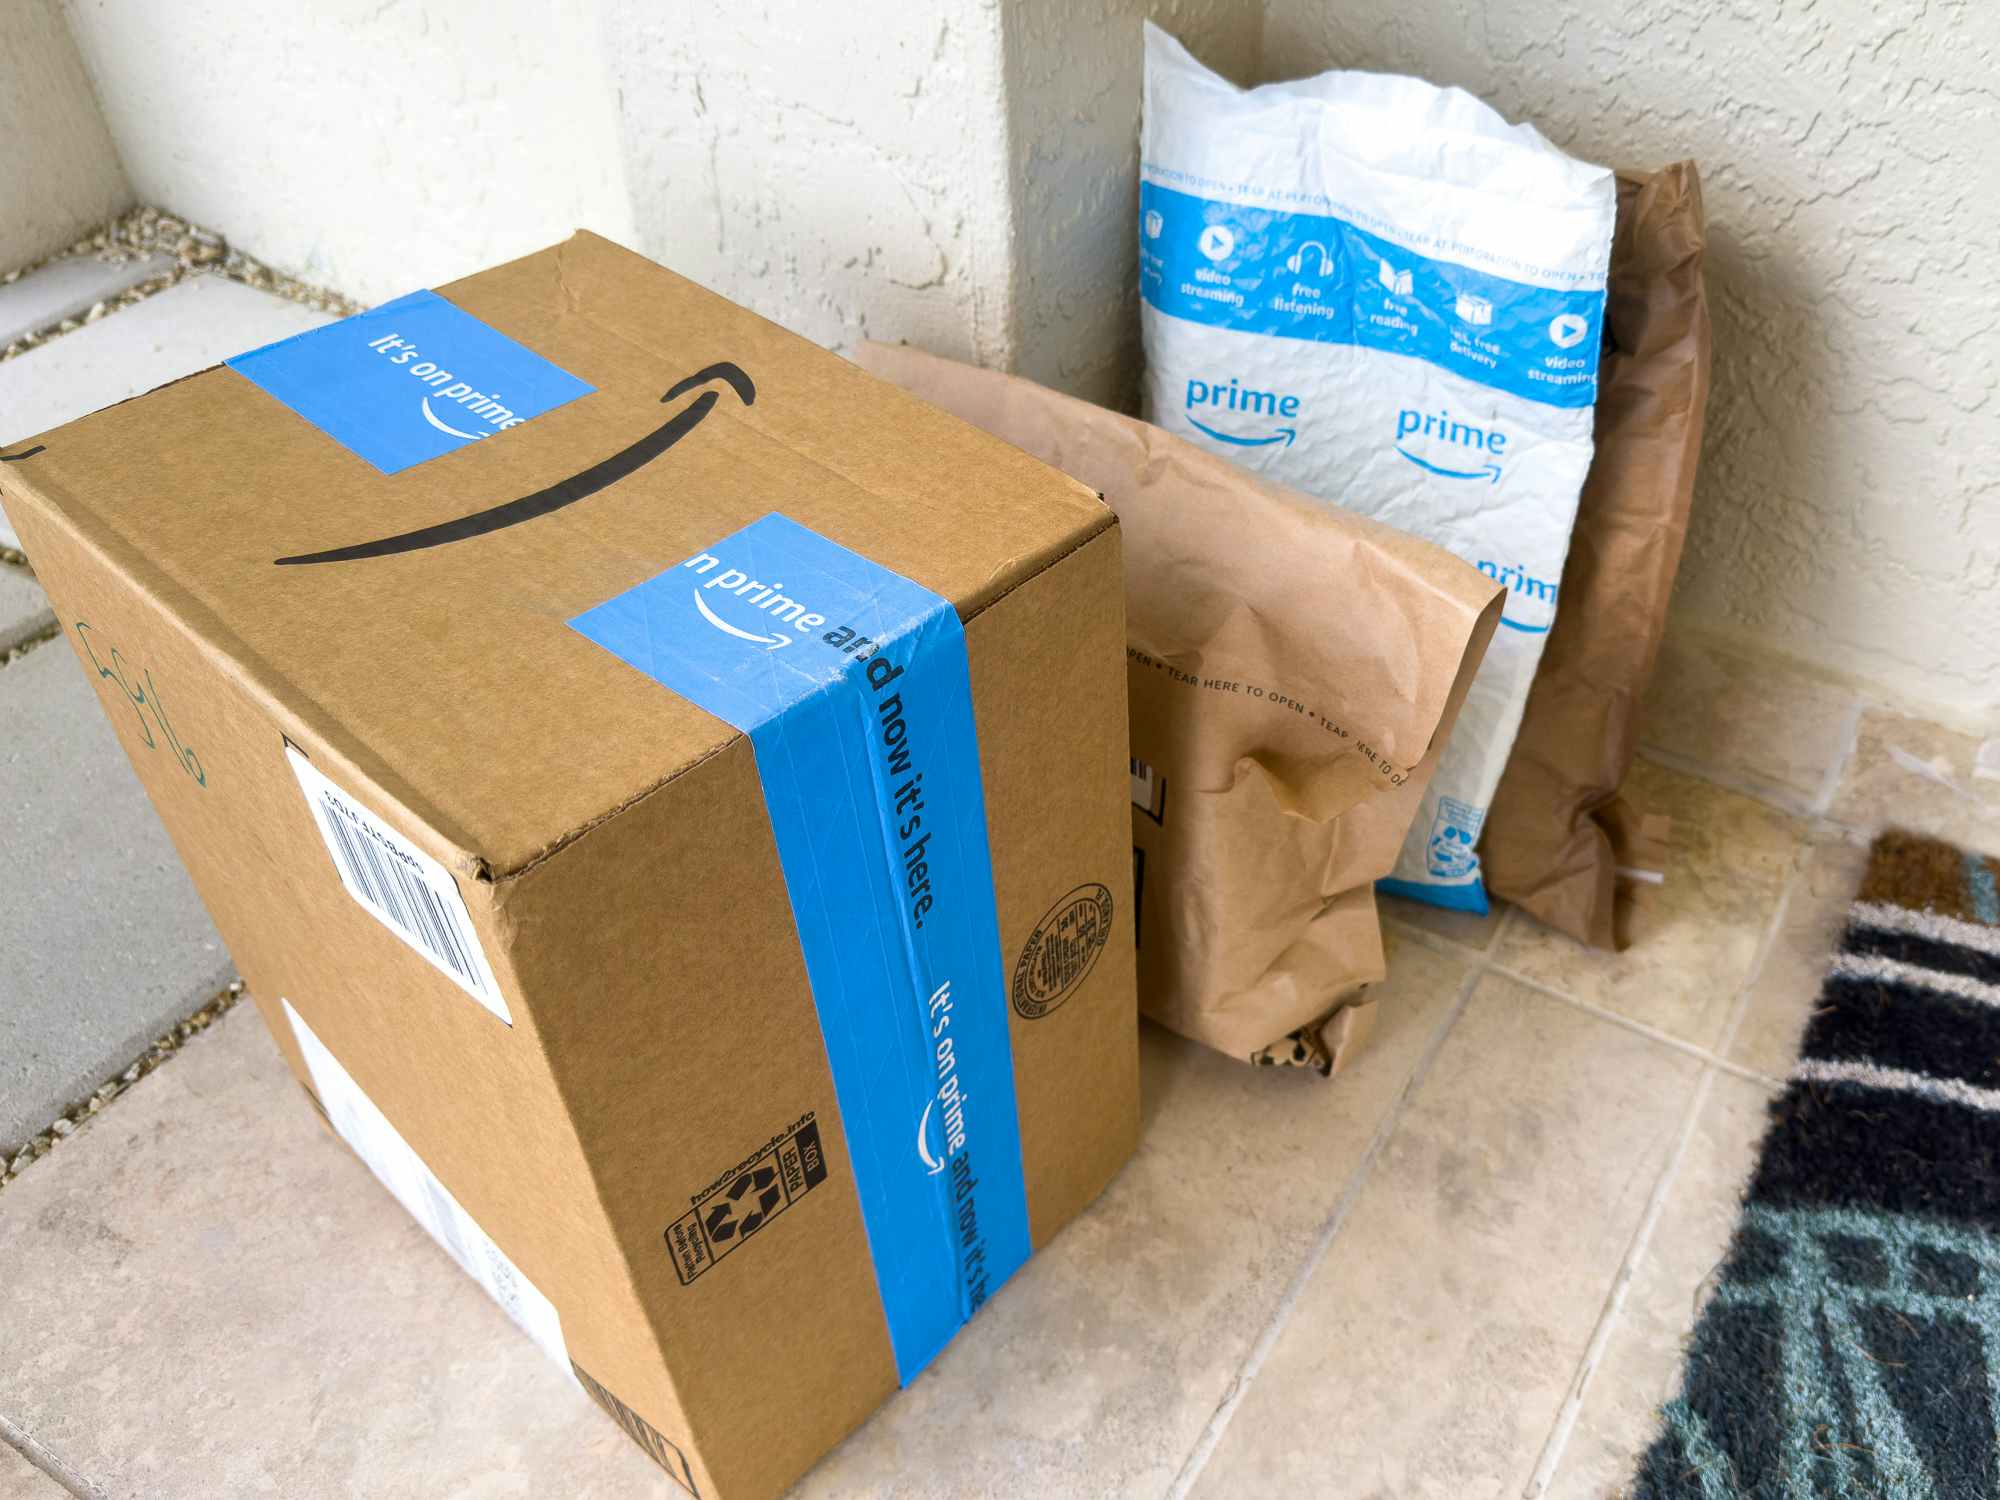 A pile of Amazon boxes and envelopes on the porch